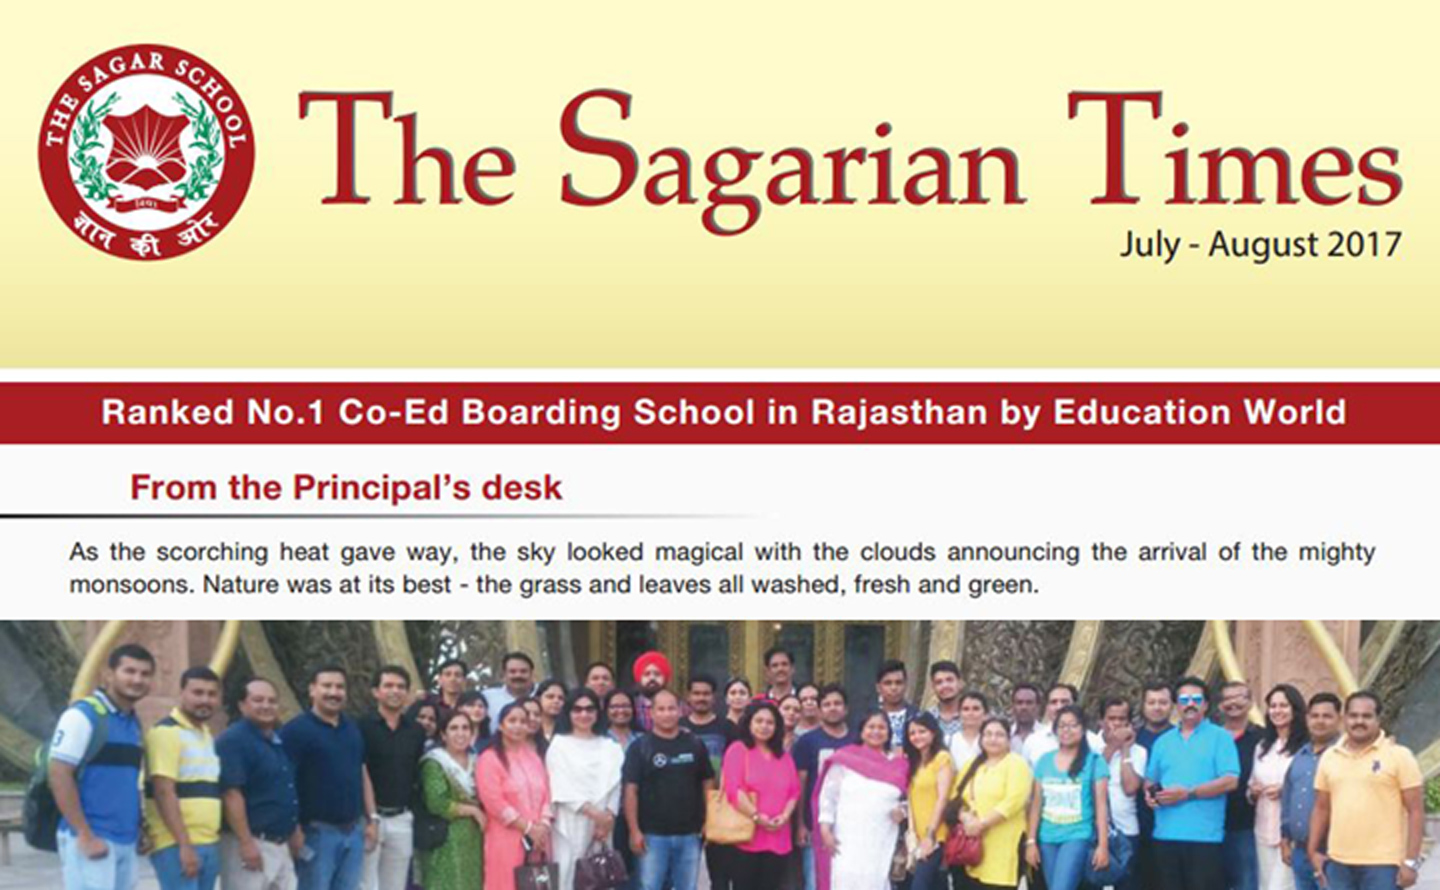 The Sagarian Times July - August 2017